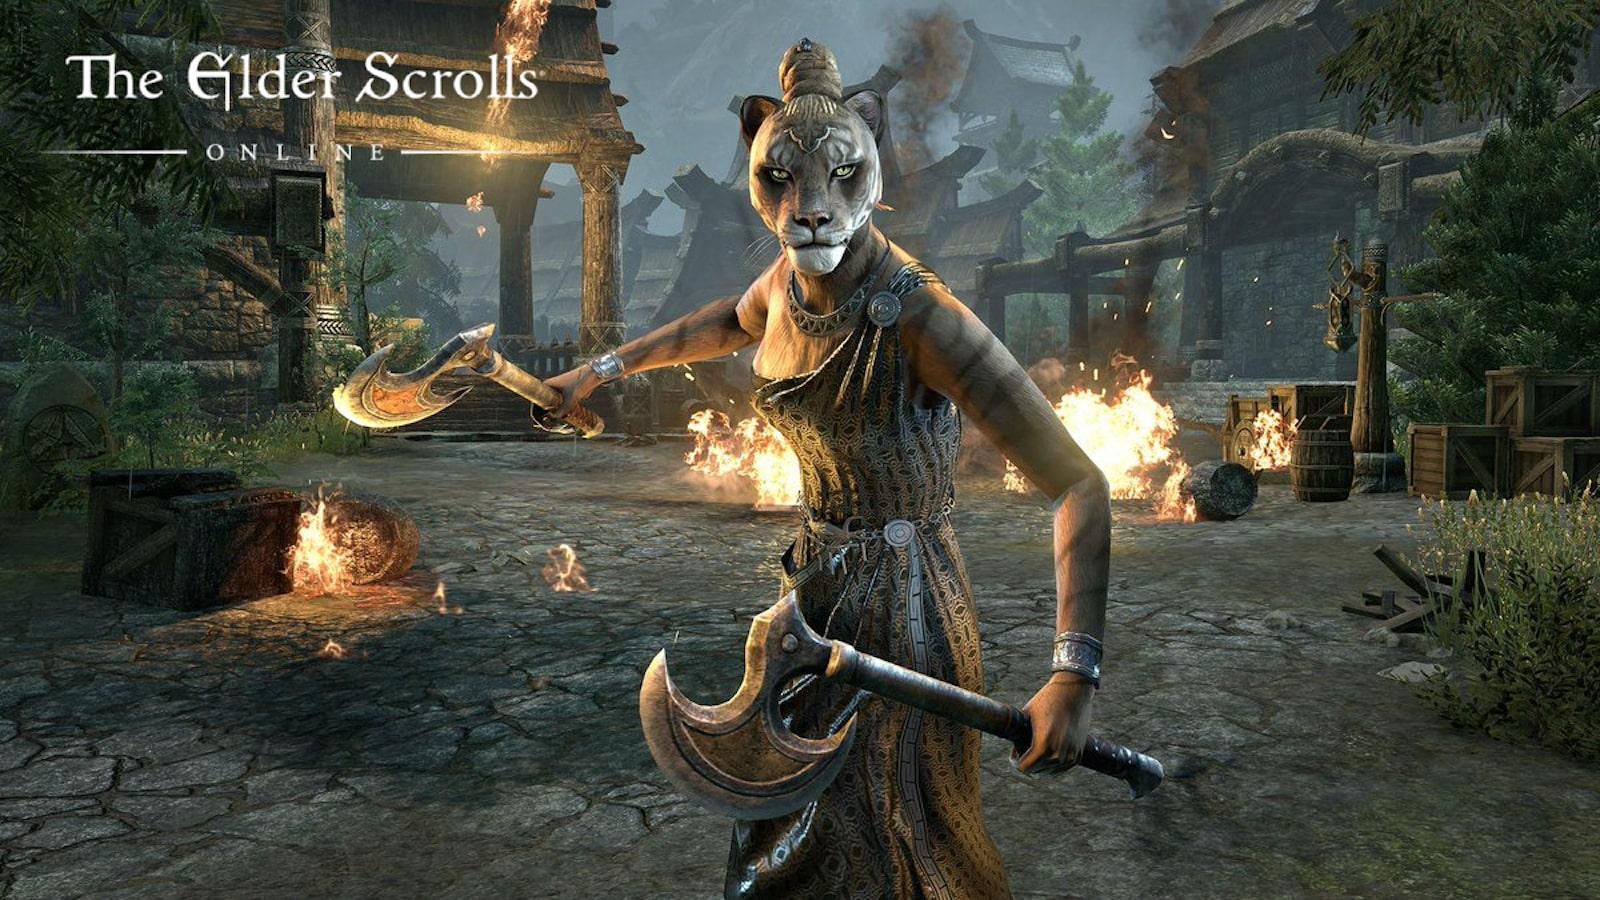 New Playable Races The Elder Scrolls 6 Could Introduce